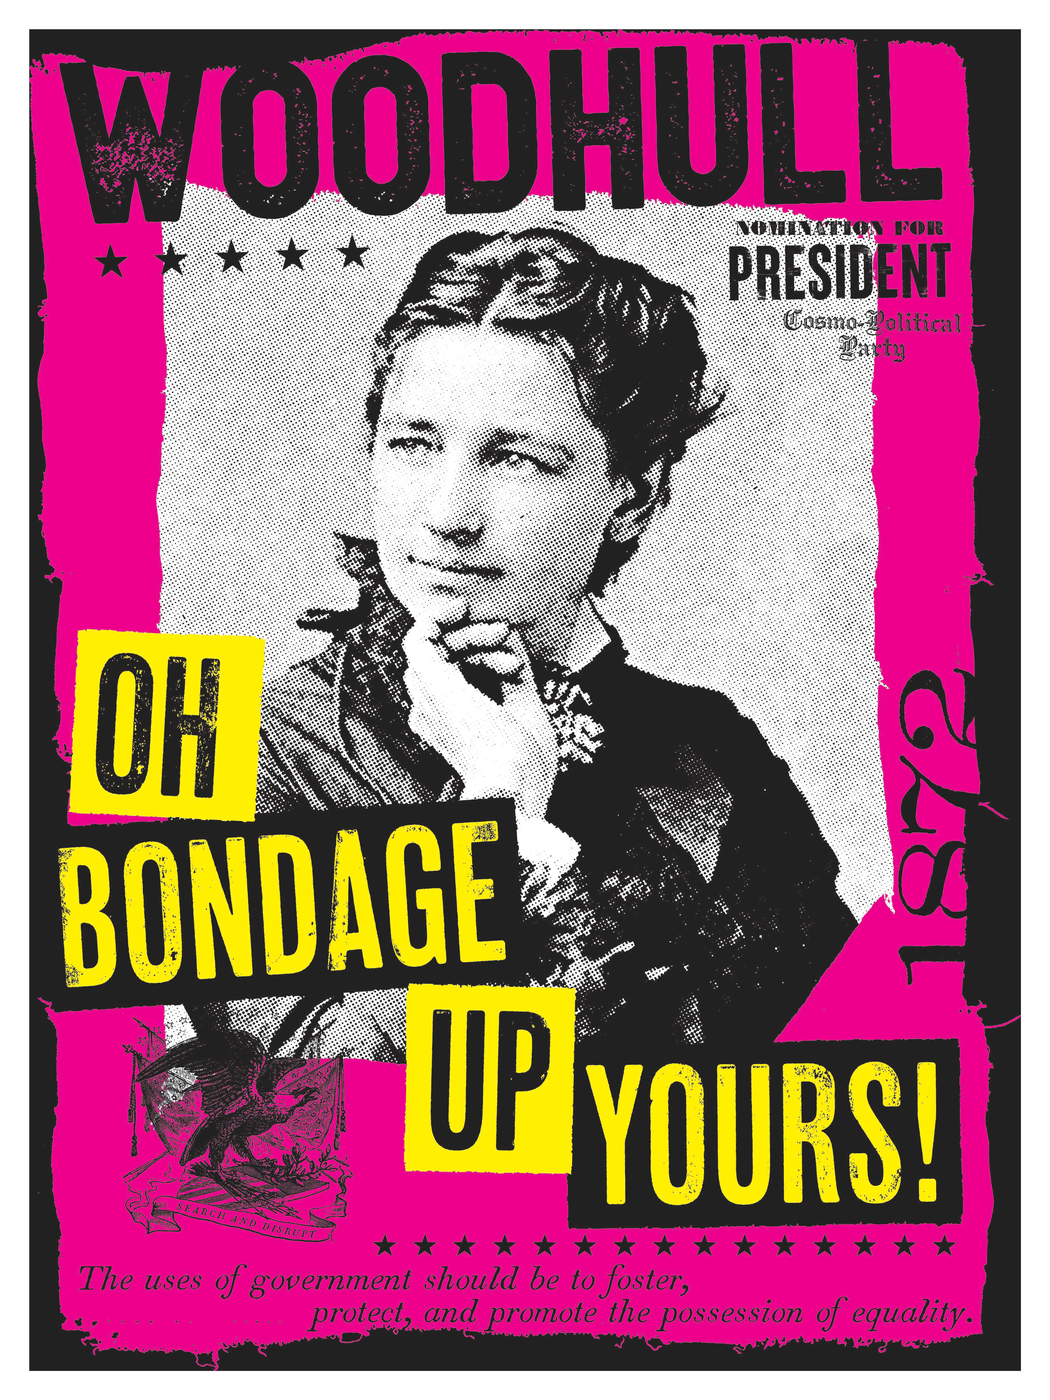 Stealworks "Victoria: Oh Bondage Up Yours!" Pink Campaign Poster